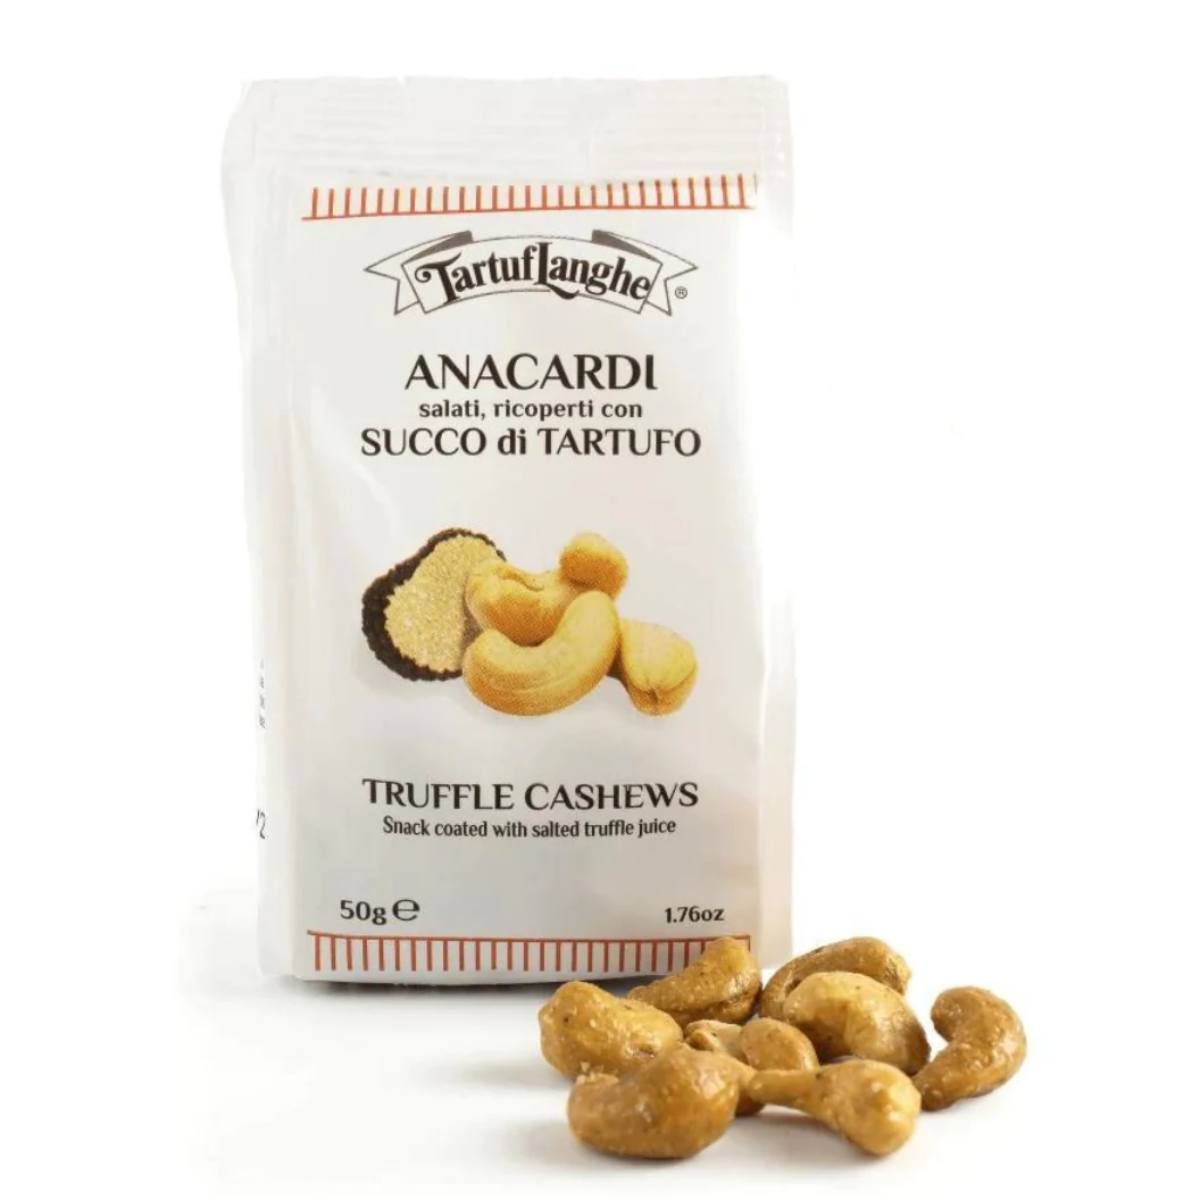 truffle cashews from Italy, olive and basket